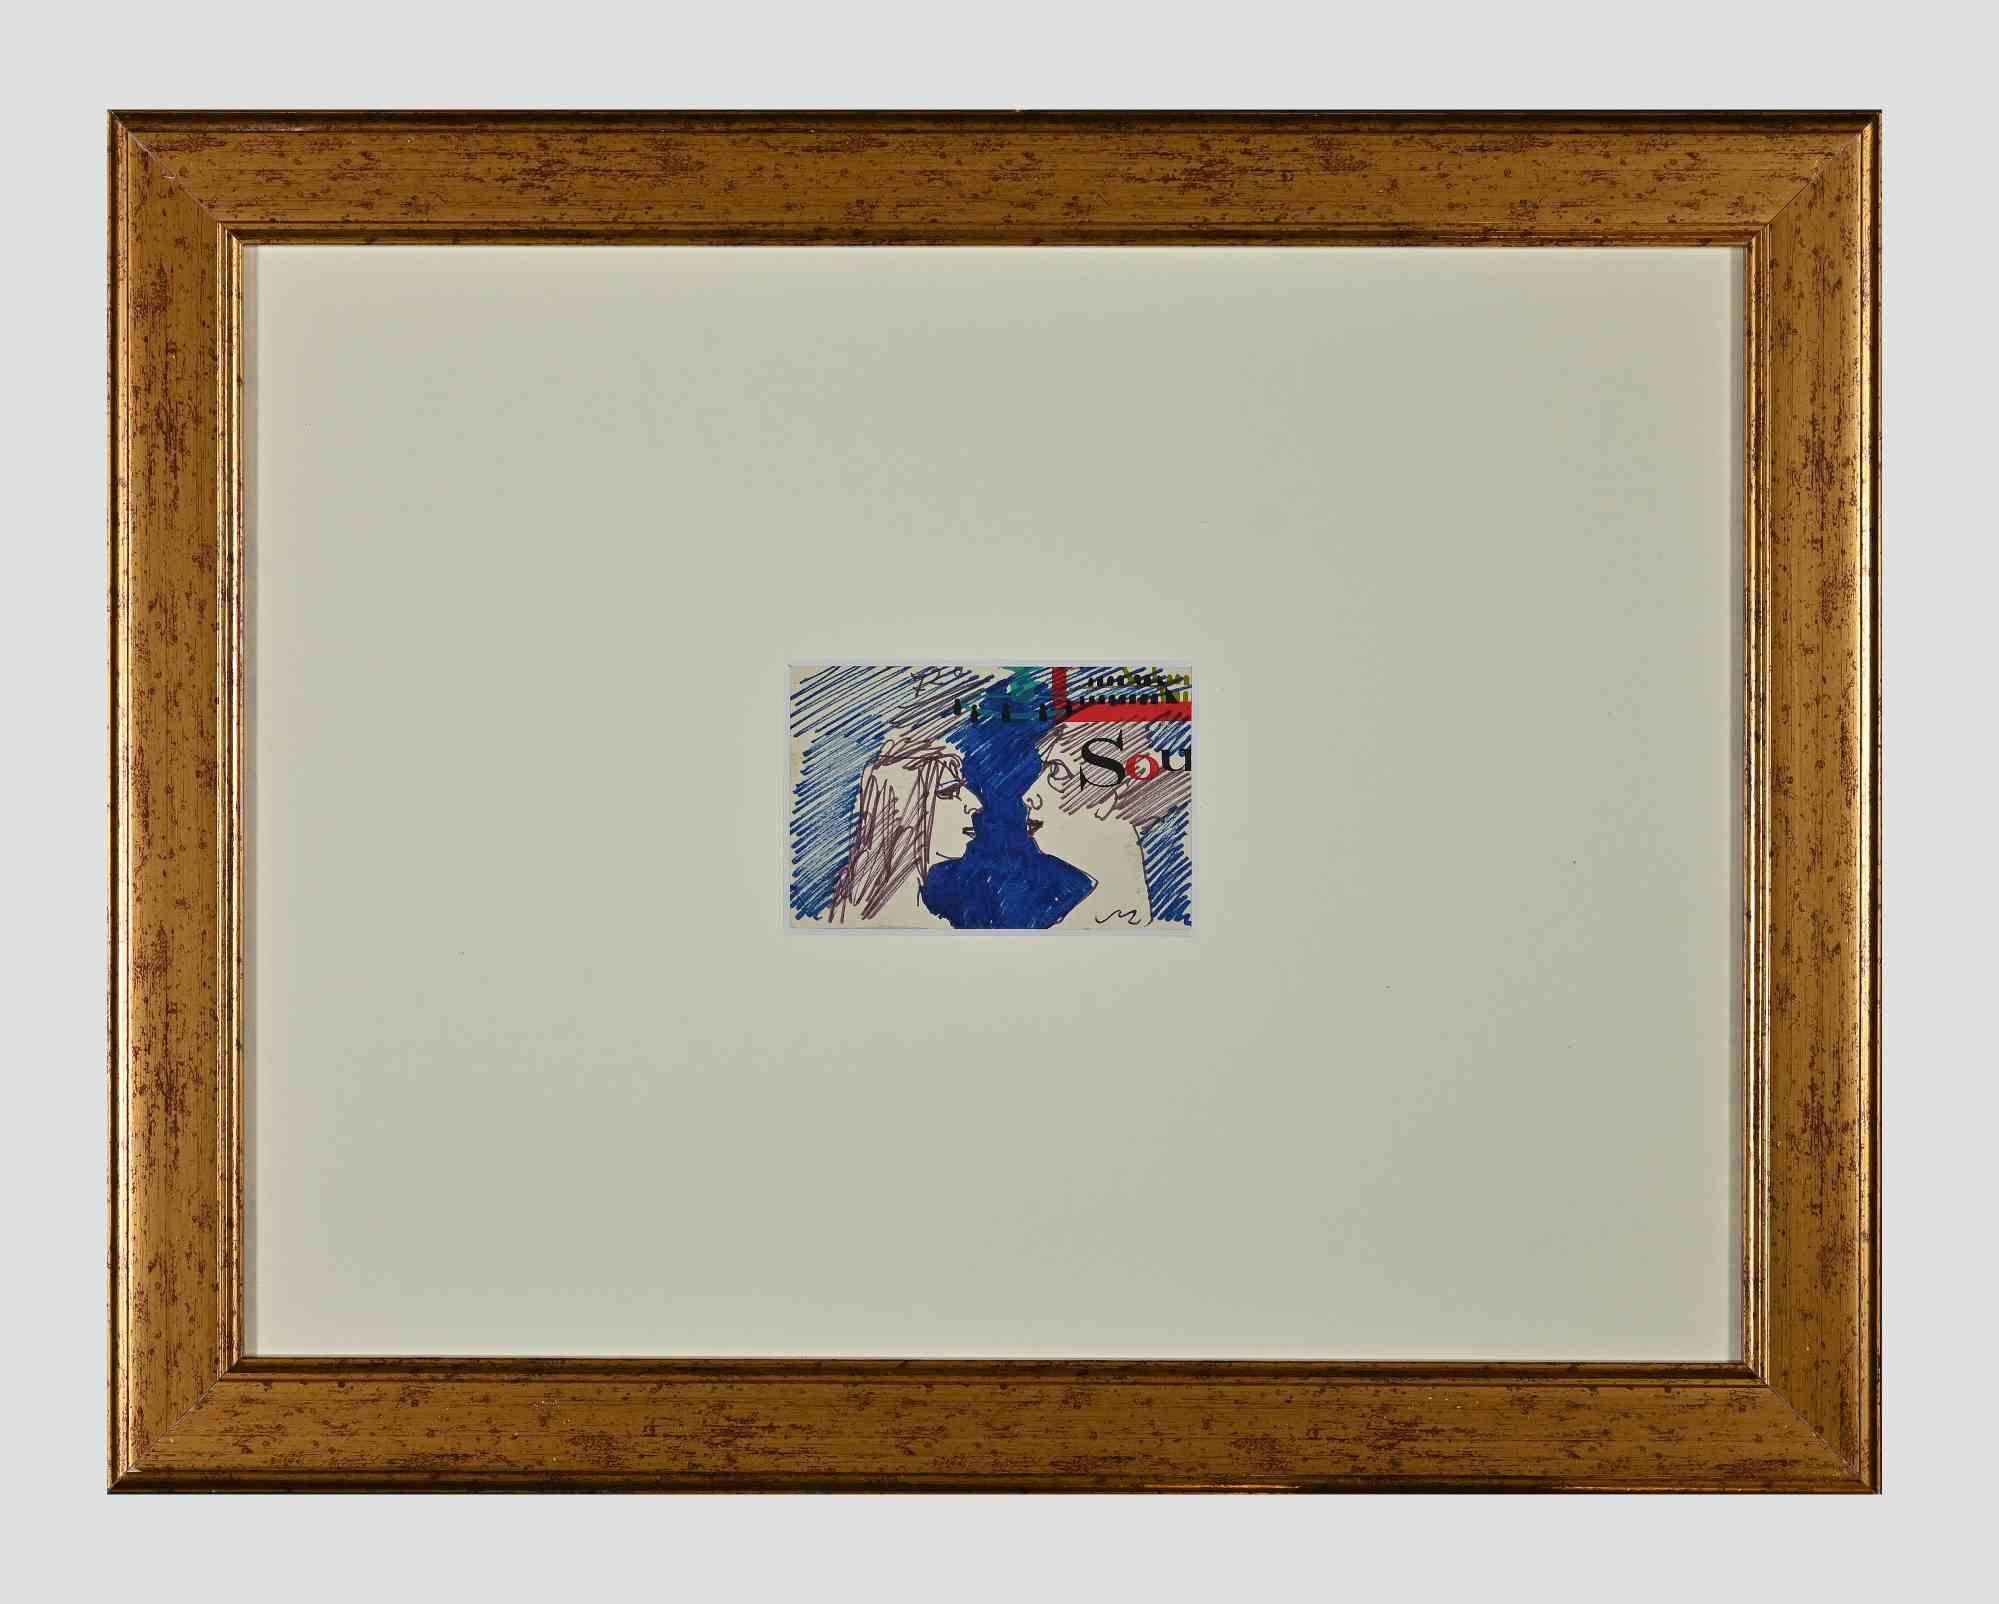 Women is an original artwork realized by Mino Maccari in the 1970s

A mixed colored drawing realized with colored markers.

Initials of the artist on the lower right margin.

Includes gilded frame.

